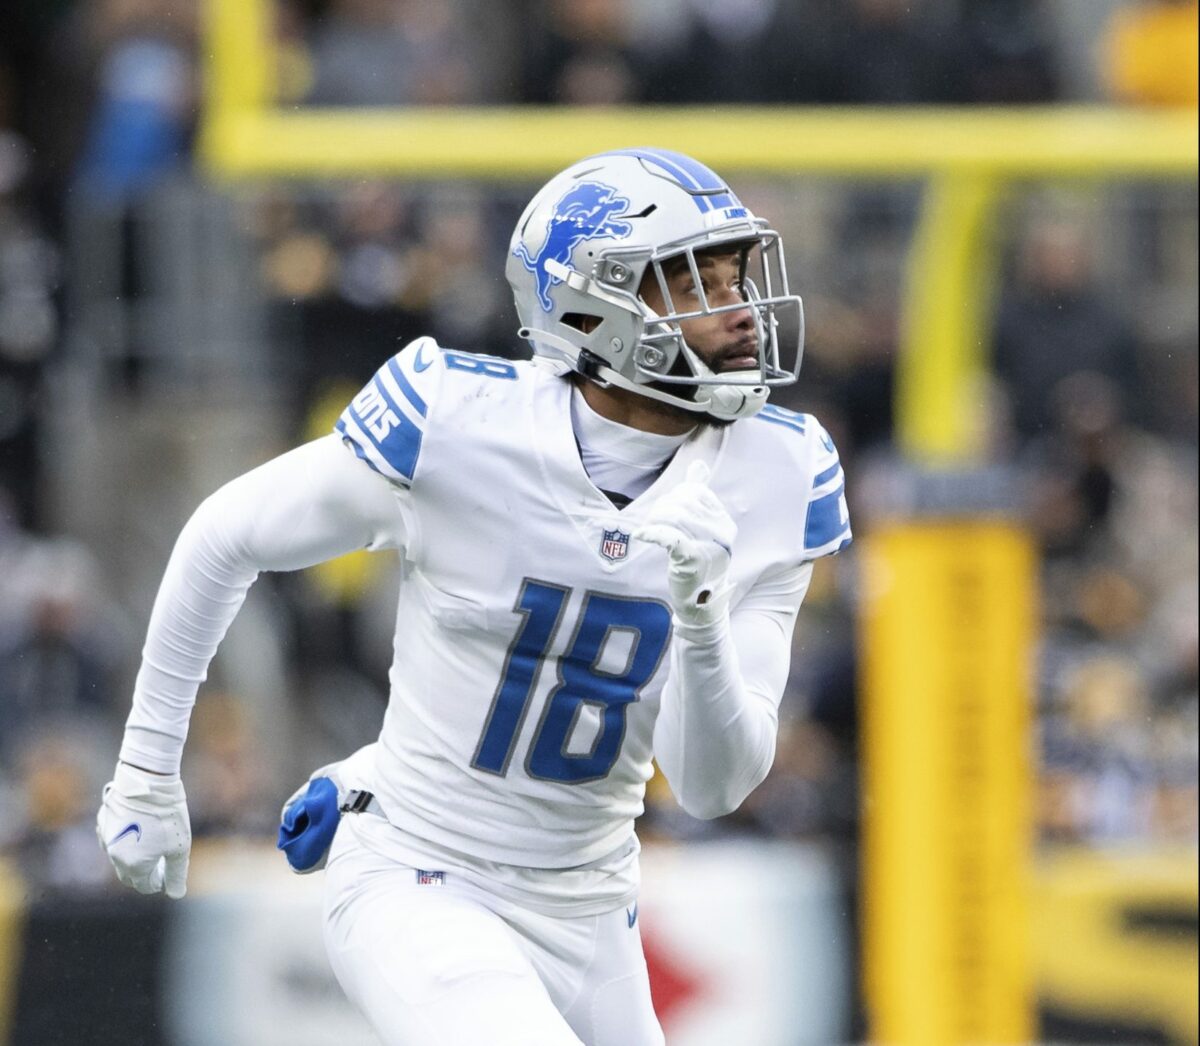 Ex-Lions WR KhaDarel Hodge signs with the Falcons